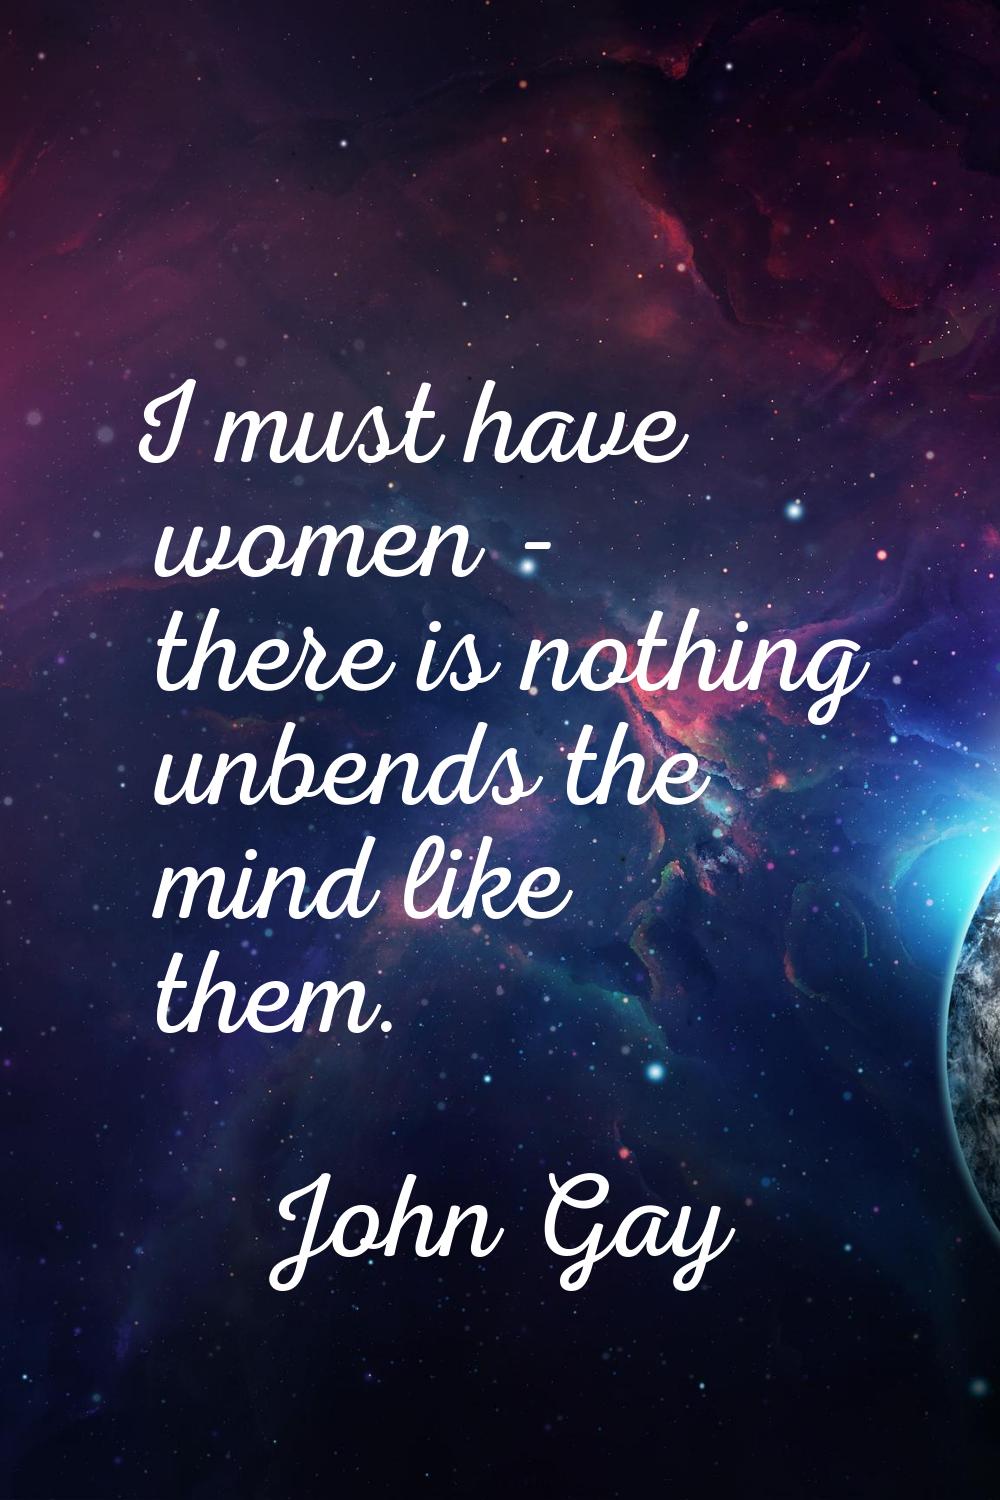 I must have women - there is nothing unbends the mind like them.